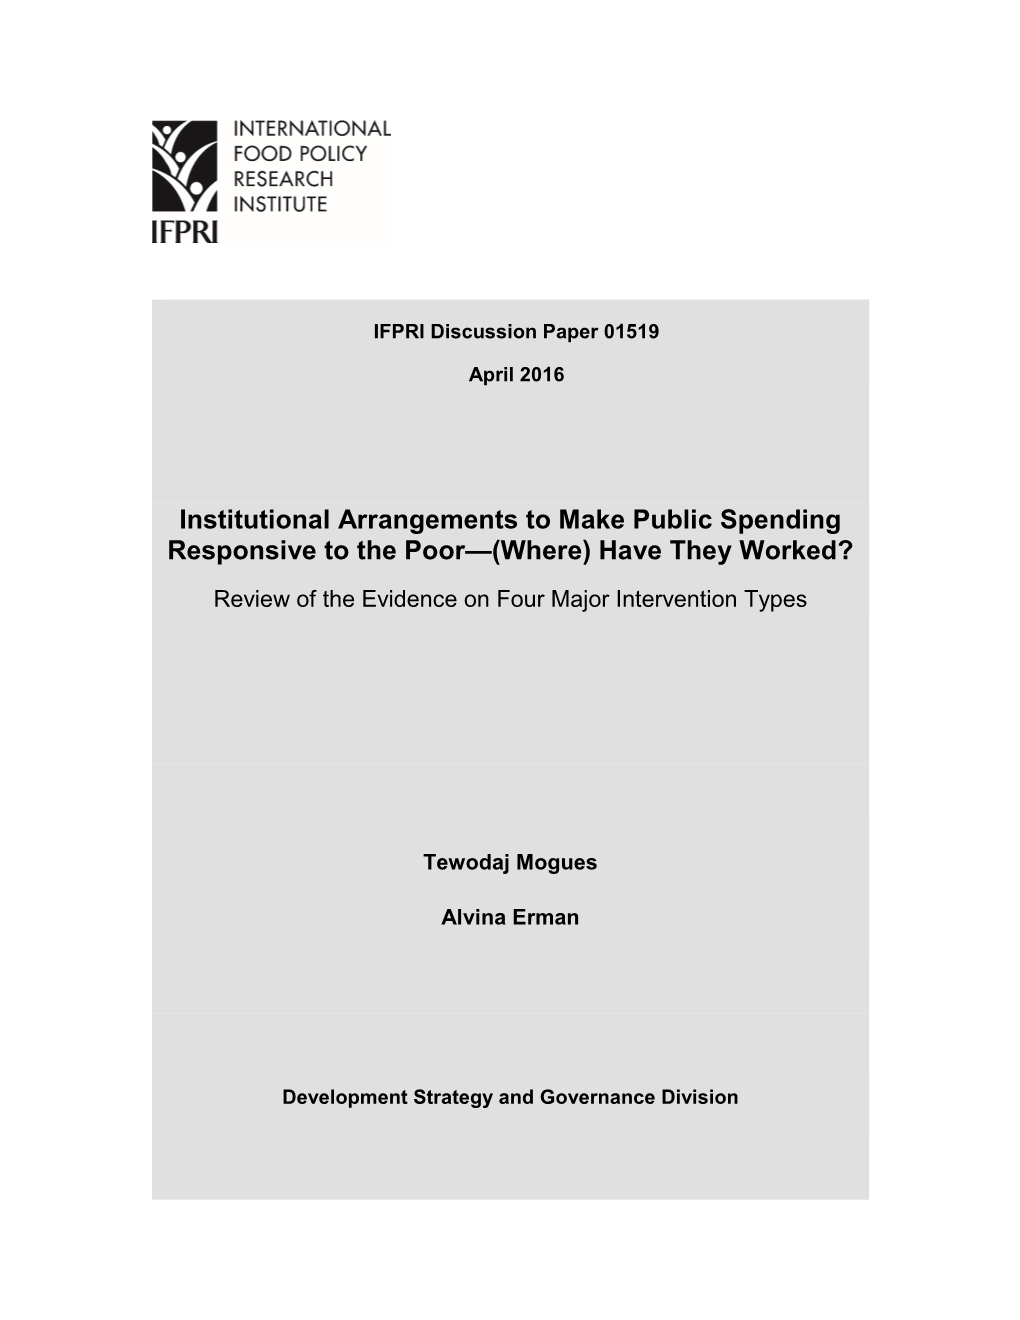 Institutional Arrangements to Make Public Spending Responsive to the Poor—(Where) Have They Worked? Review of the Evidence on Four Major Intervention Types